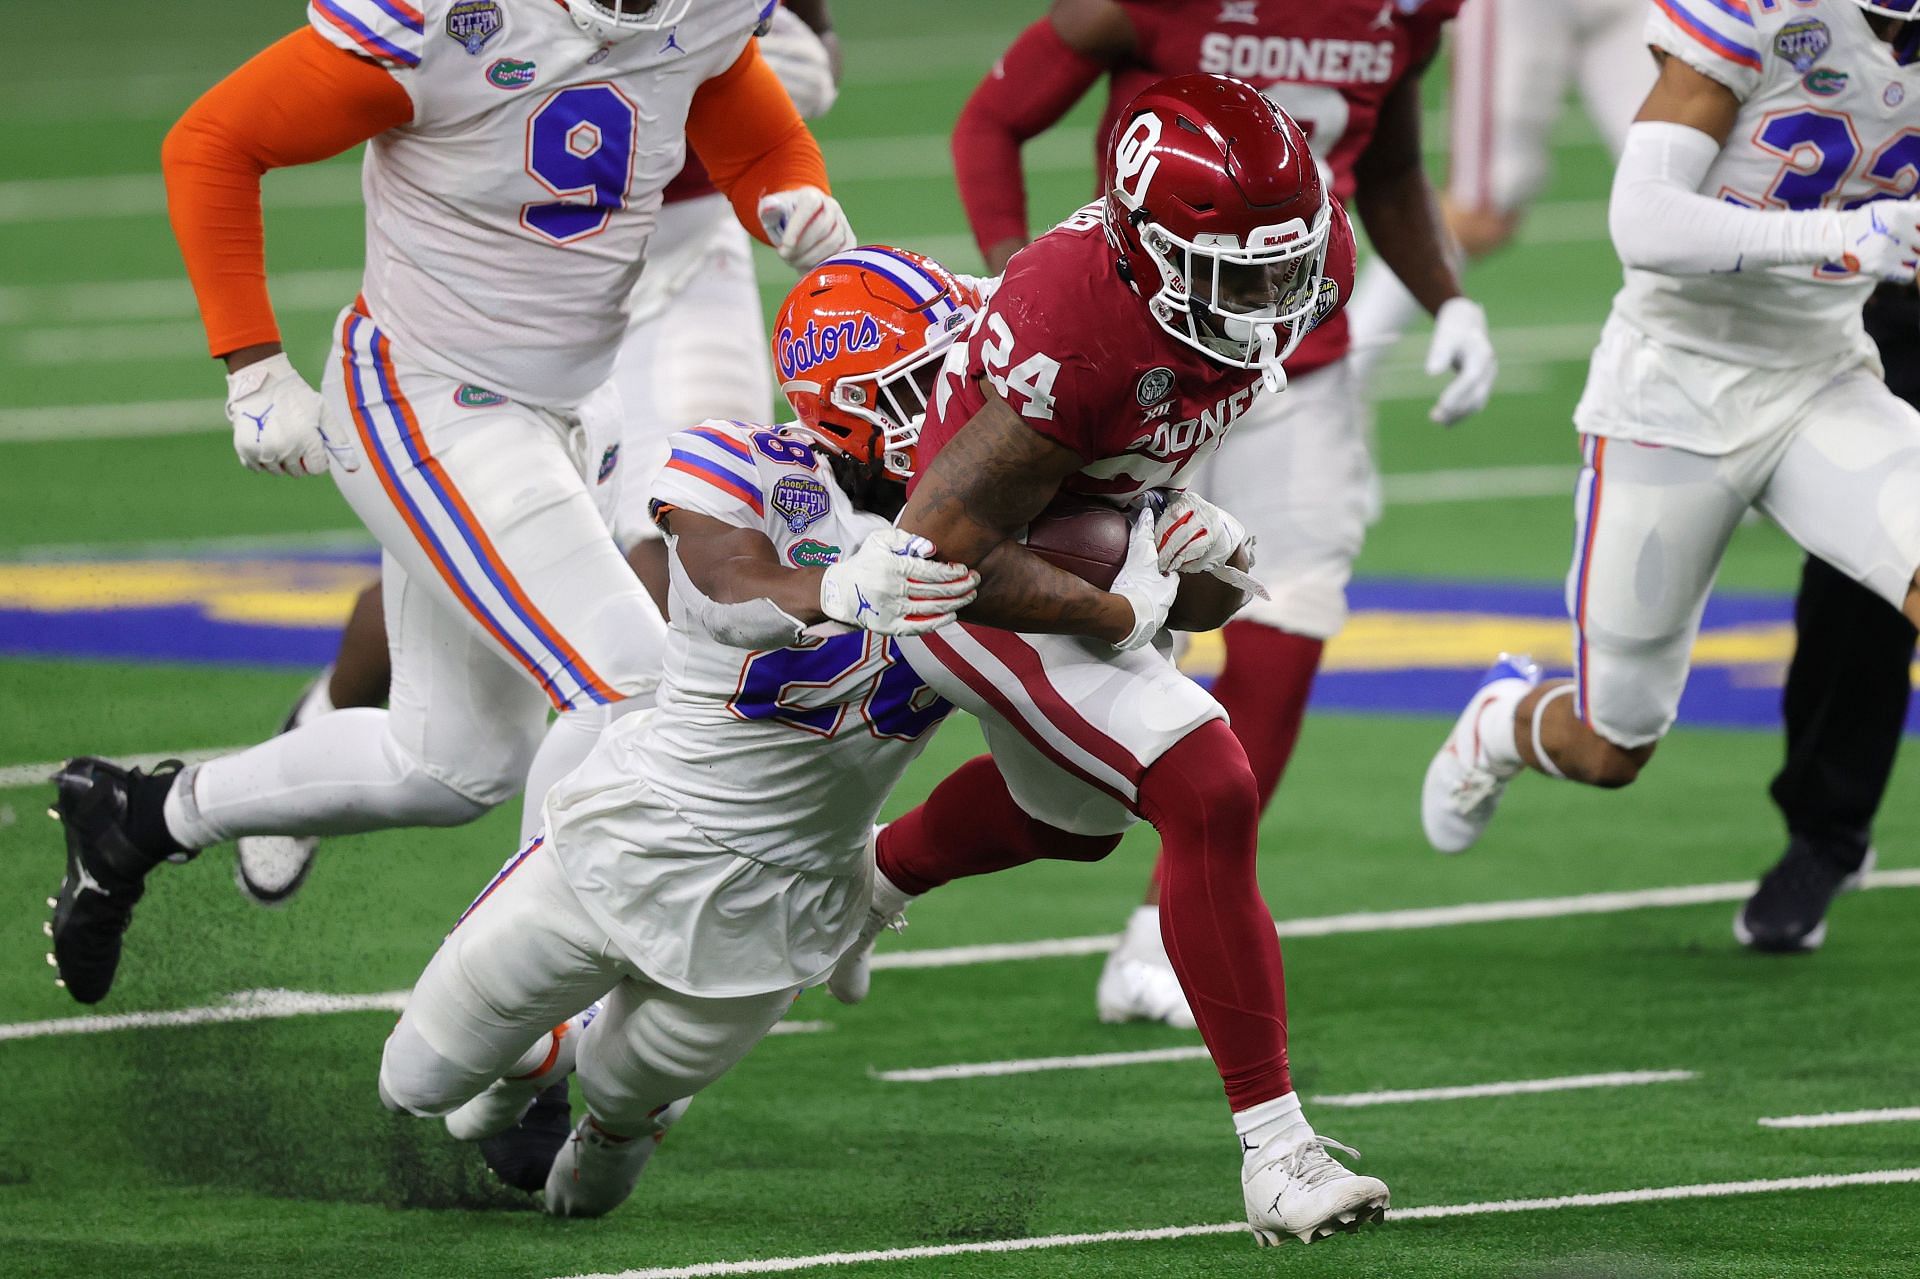 Running back Marcus Major #24 of the Oklahoma Sooners is tackled by linebacker Ty&#039;Ron Hopper #28 of the Florida Gators